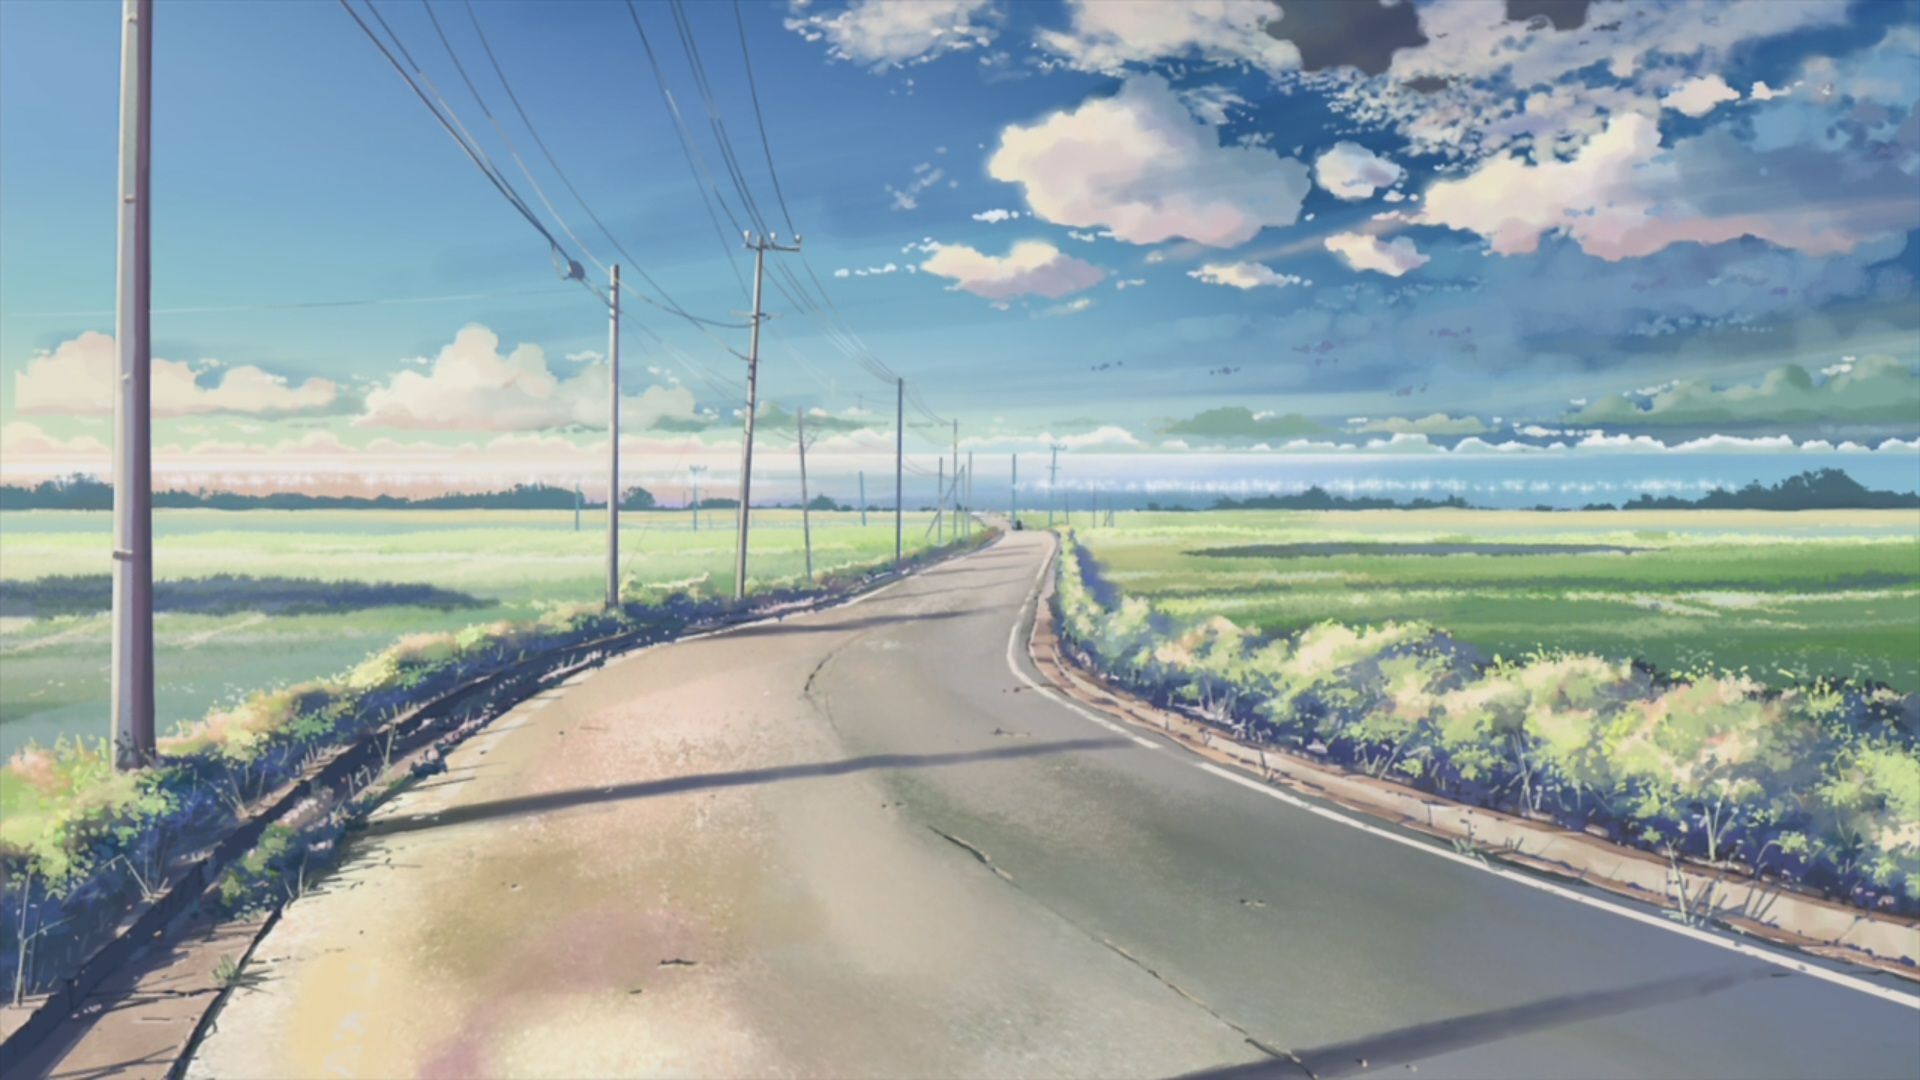 Anime Scenery HD Wallpaper and Background. Anime scenery